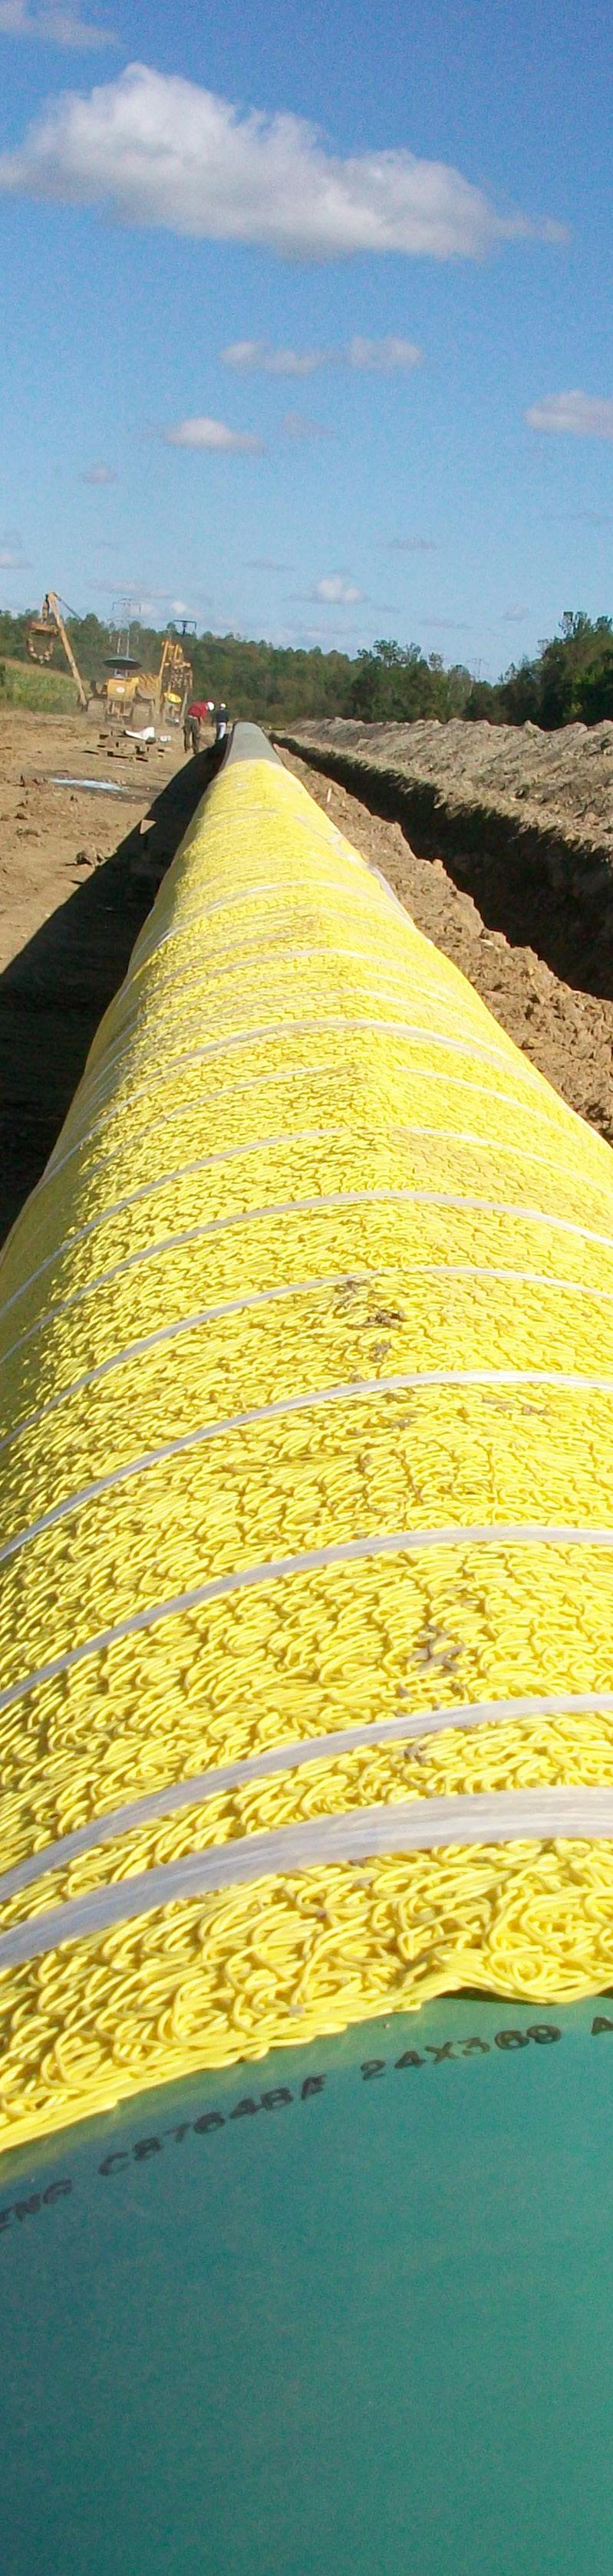 TUFF-N-NUFF ROCKSHIELD FOR PIPELINE COATING PROTECTION TUFF-N-NUFF is unmatched in impact resistance properties compared to other field installed rockshields.